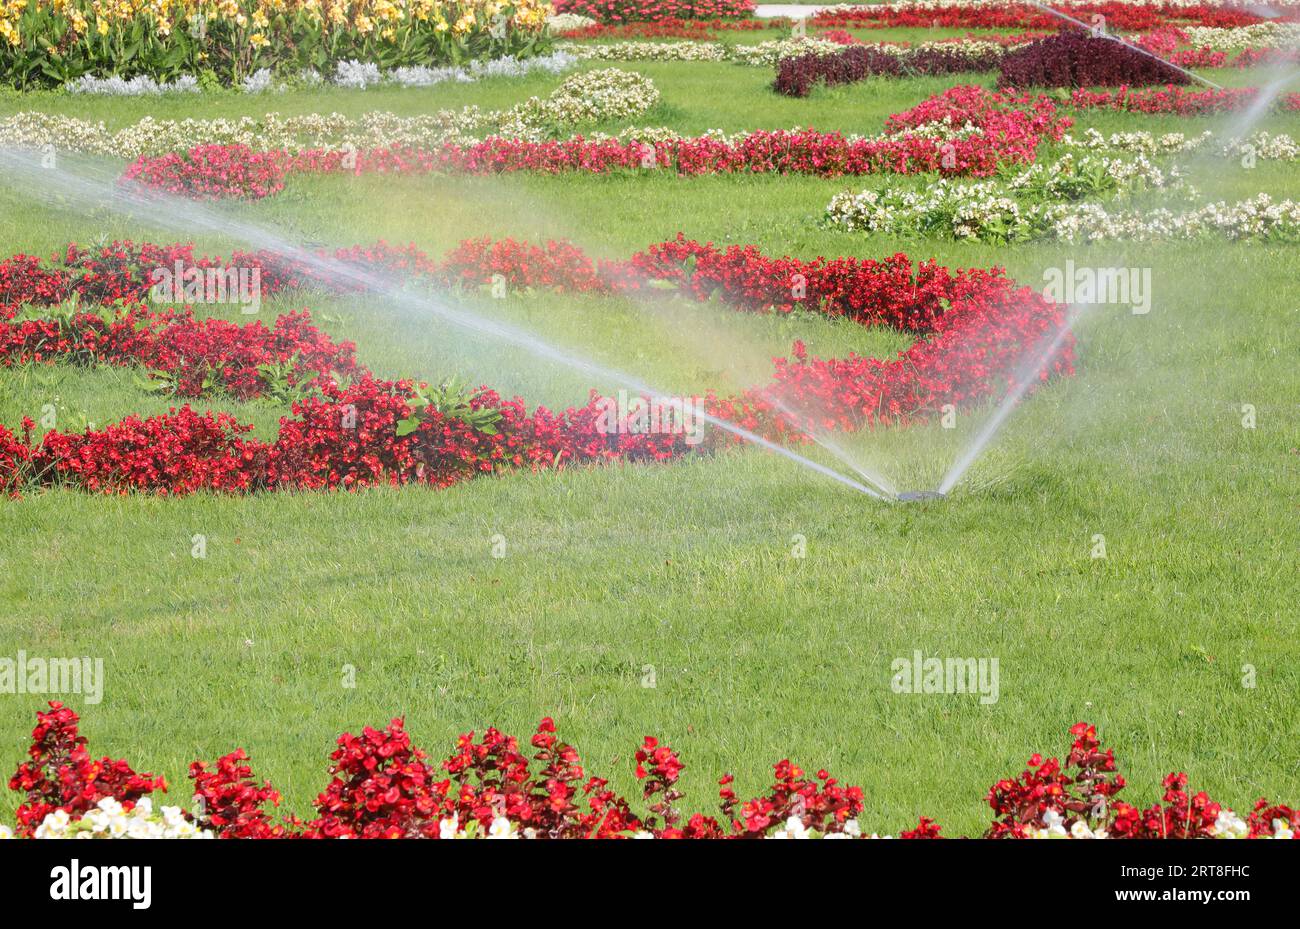 wide flowery garden with automatic irrigation system in operation during the summer Stock Photo